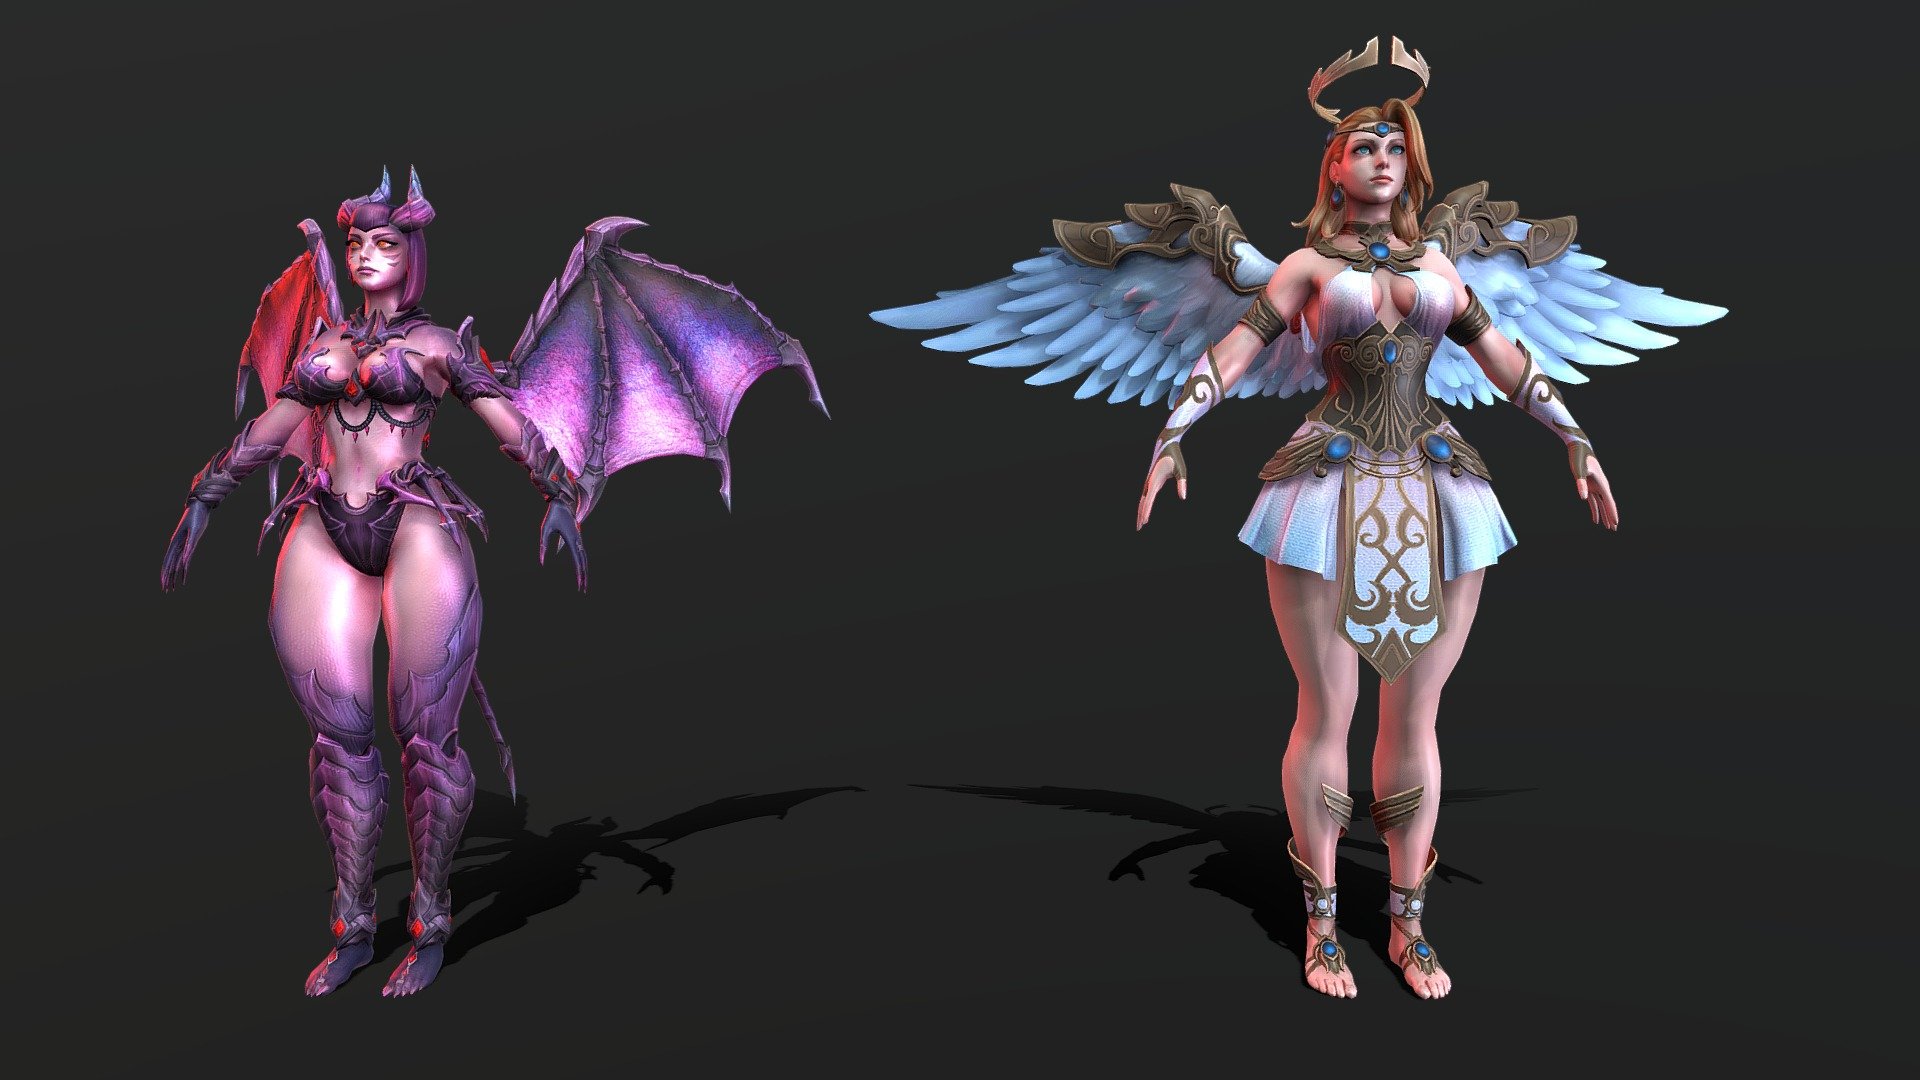 I always dreamt of the day I could make a pair of Angels and Demons.

These lovely ladies are based off the game SMITE.. seems to be a WOW clone. Much better looking tho (in-game) and free to play.

I kept em almost identical to the originals in this case, only making some subtle improvements. Higher Res, added Norms, proportional peacocking to generate &ldquo;thirst